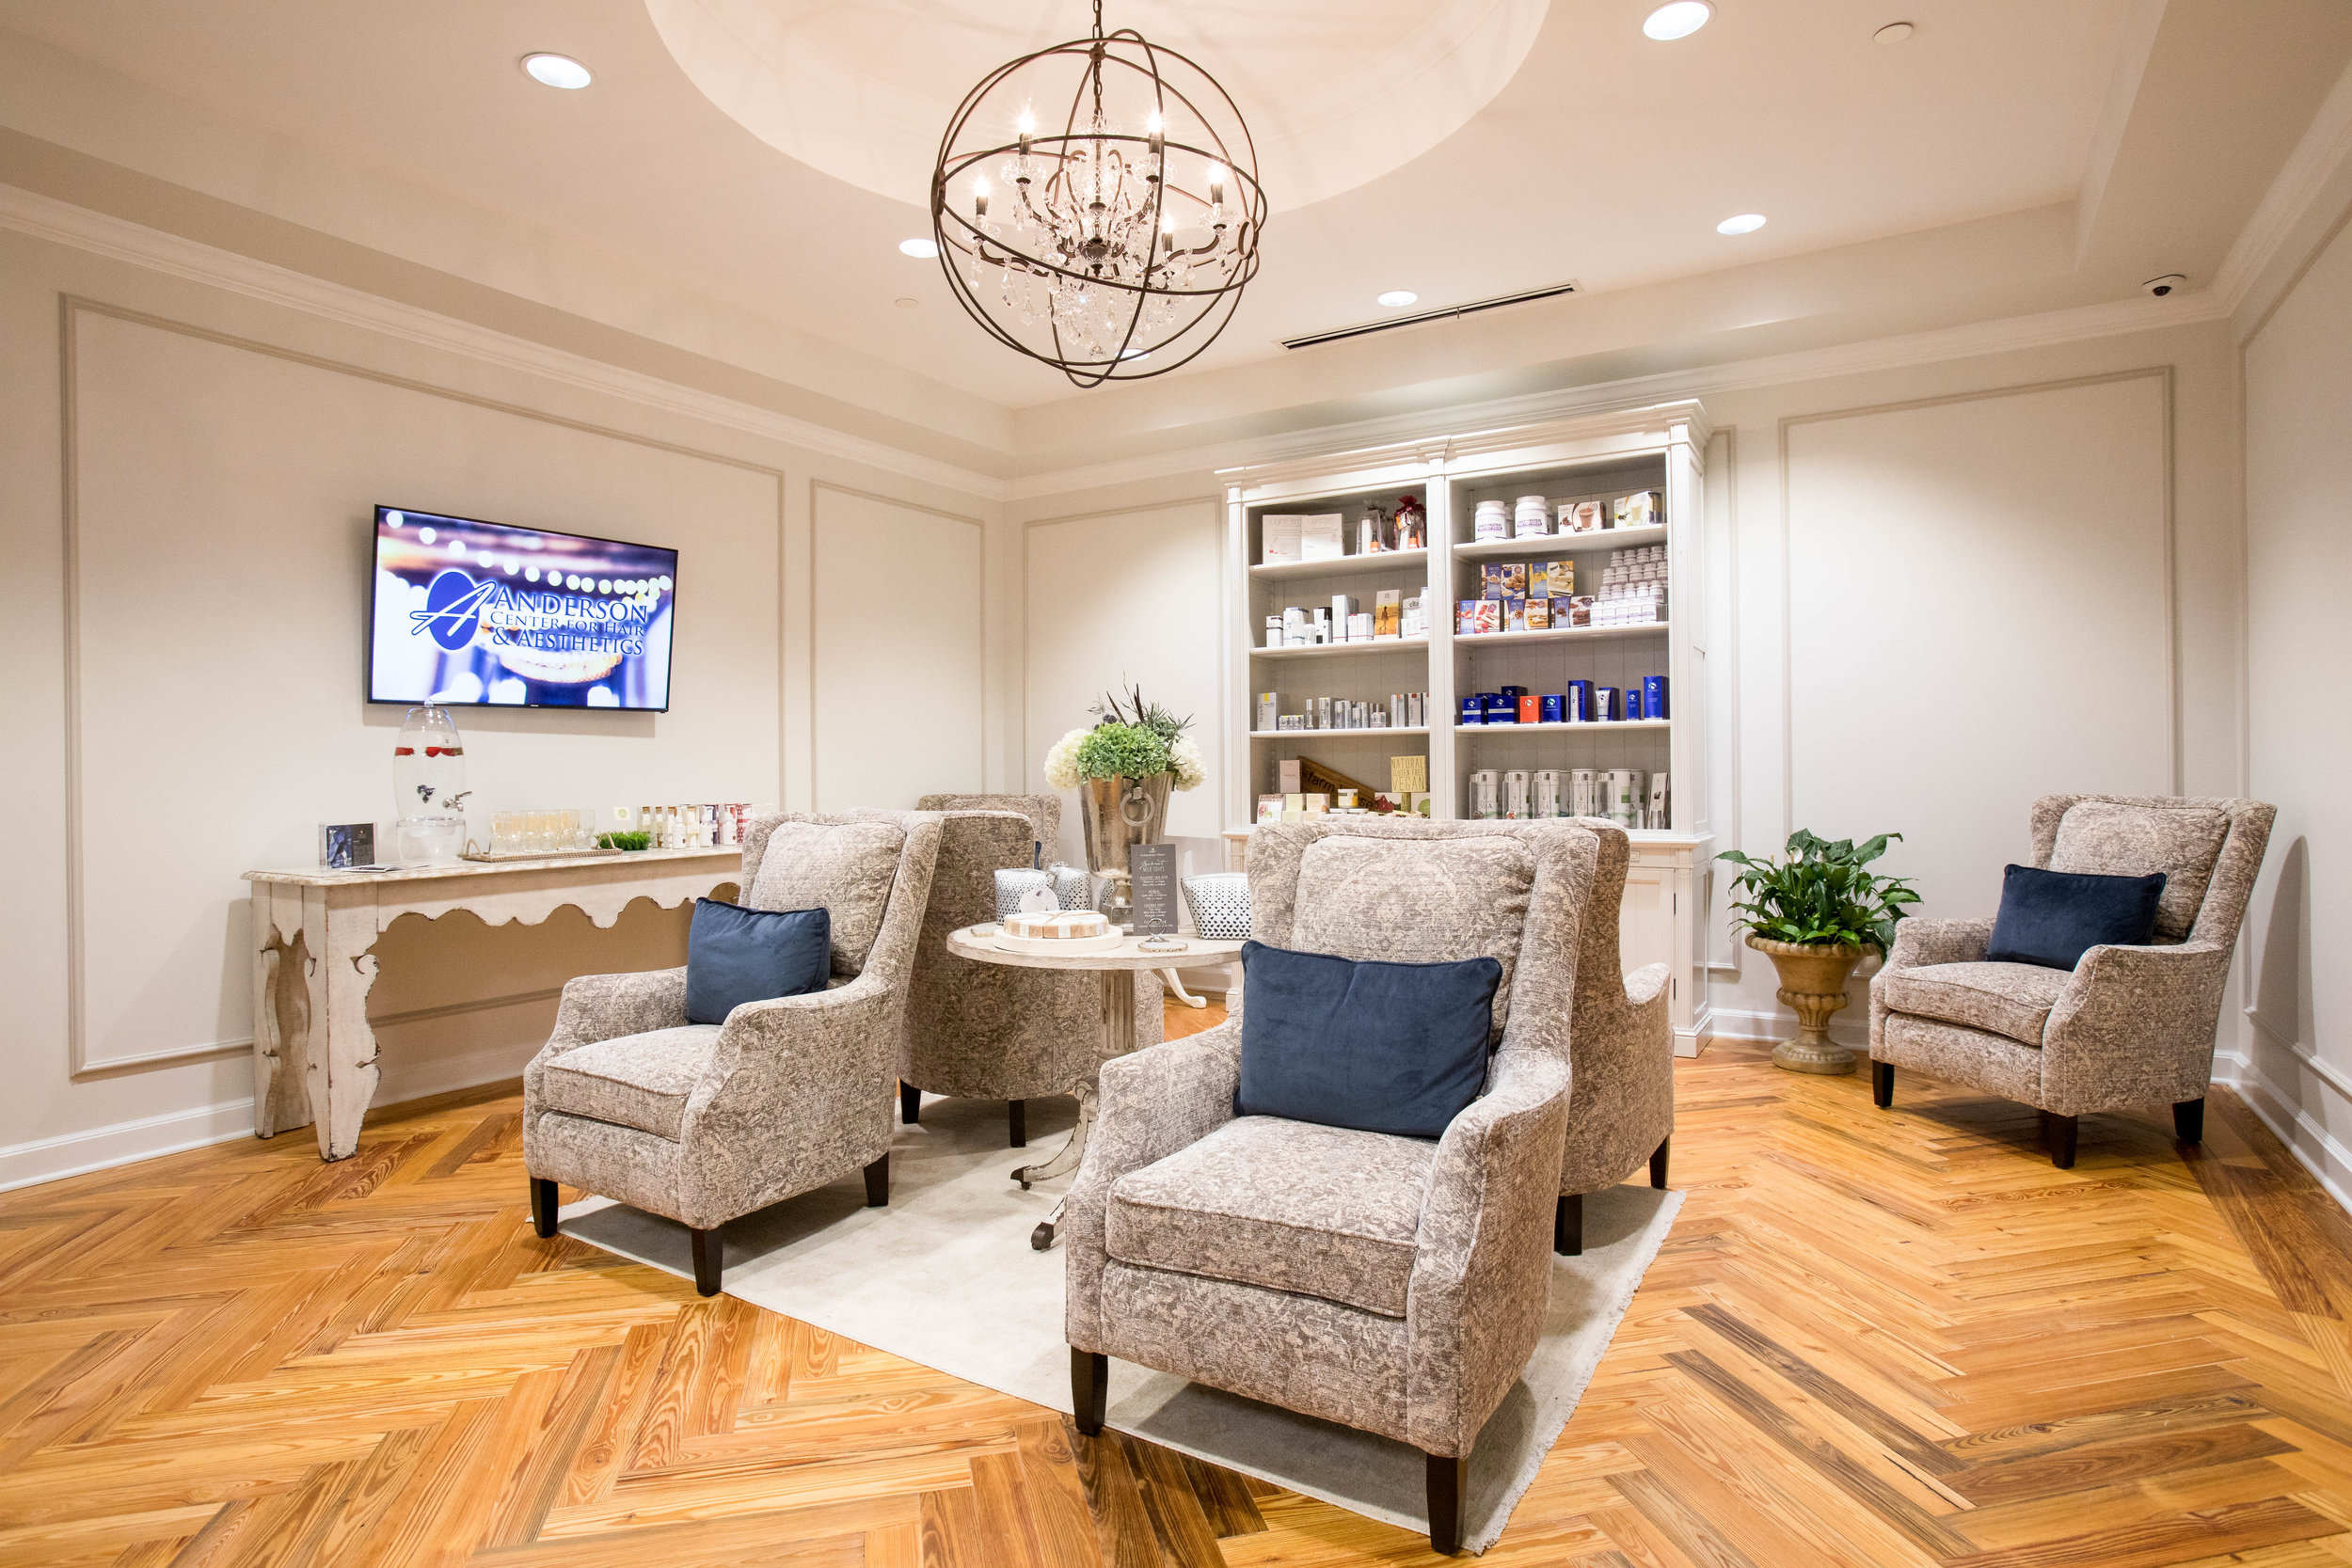  Anderson Center for Hair and Aesthetics 